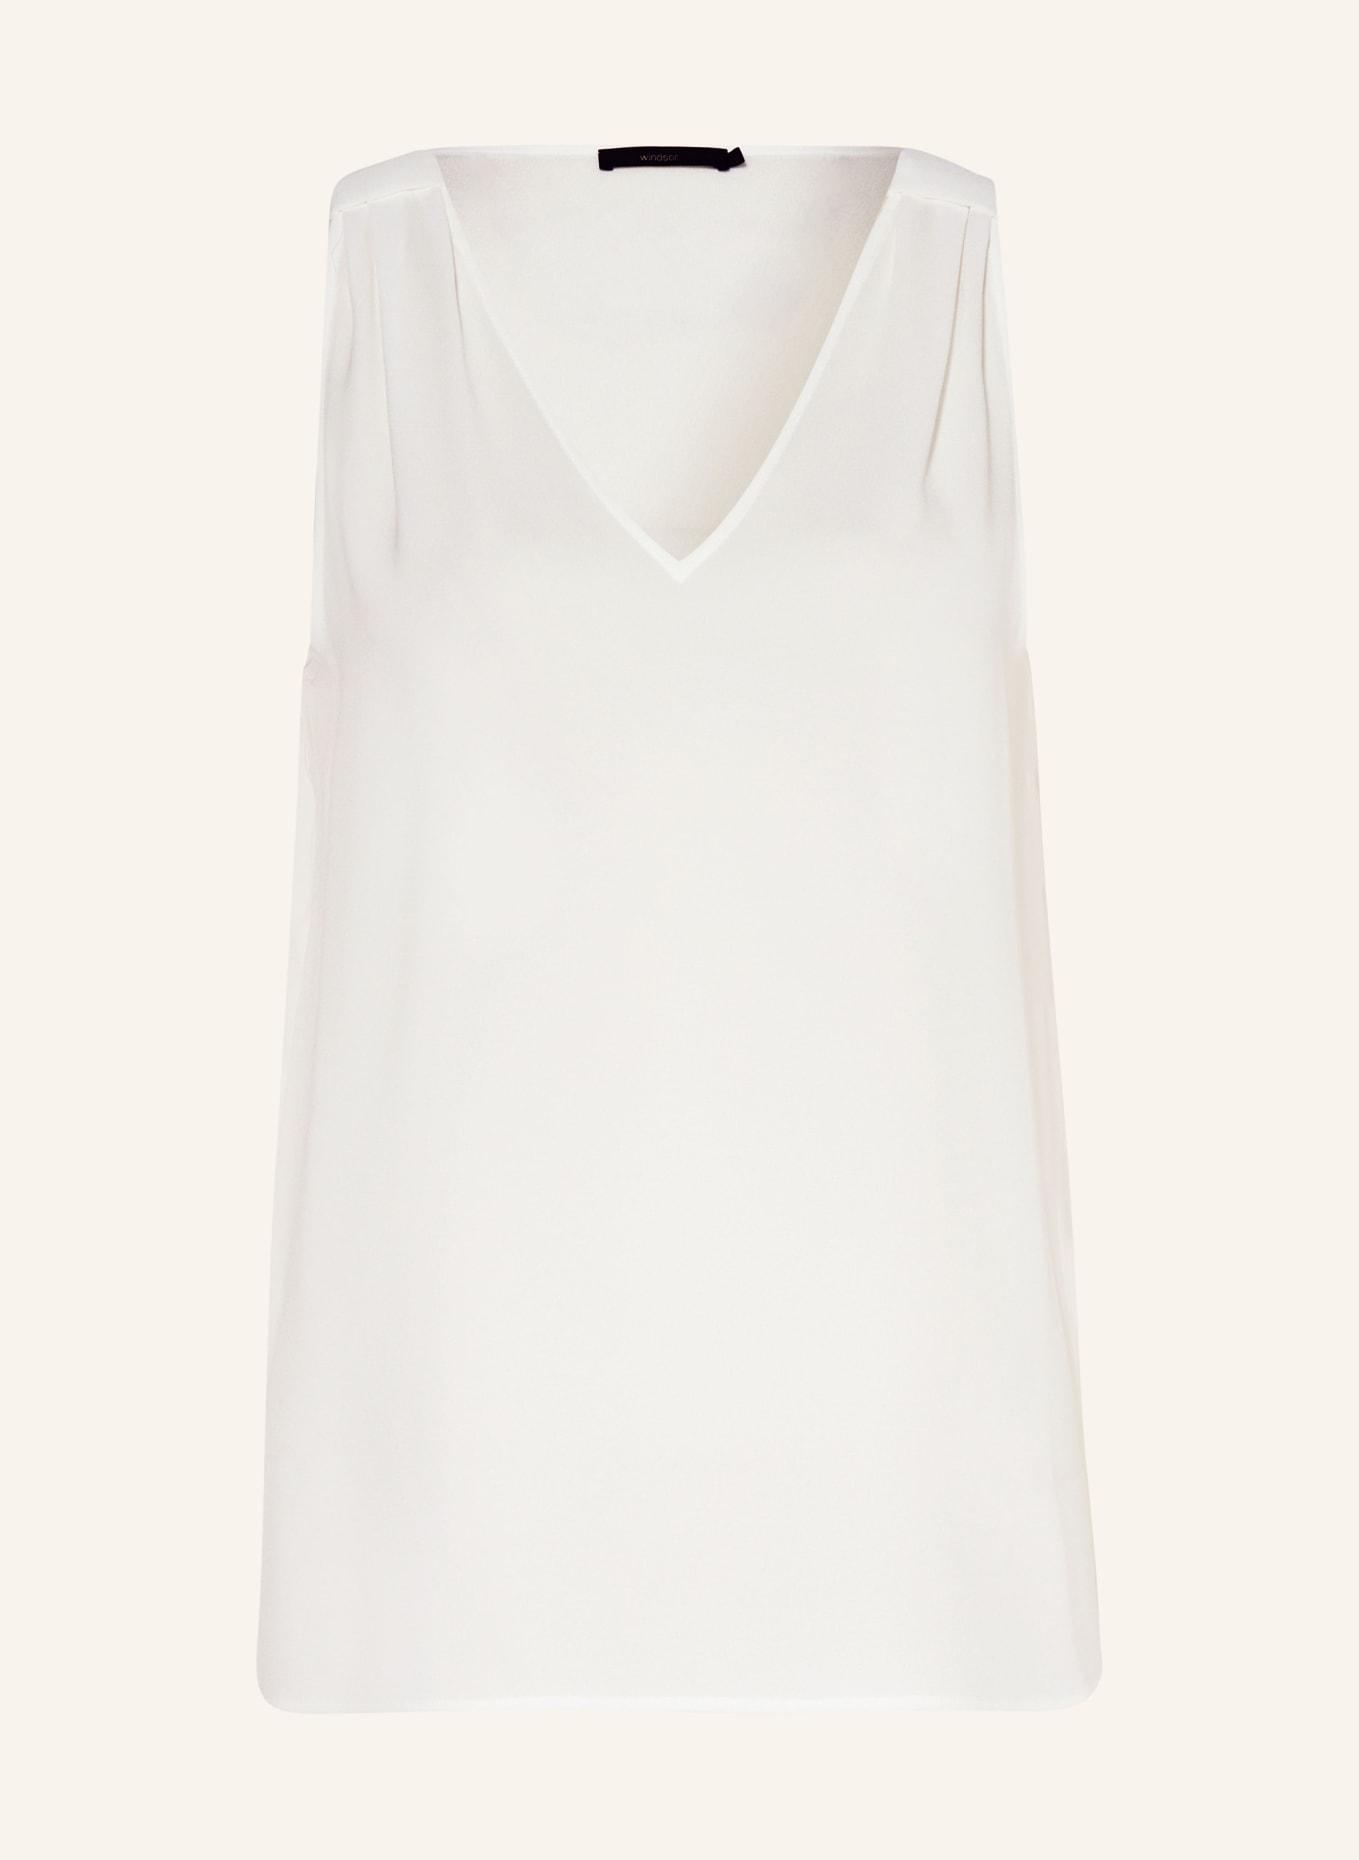 windsor. Blouse top, Color: WHITE (Image 1)